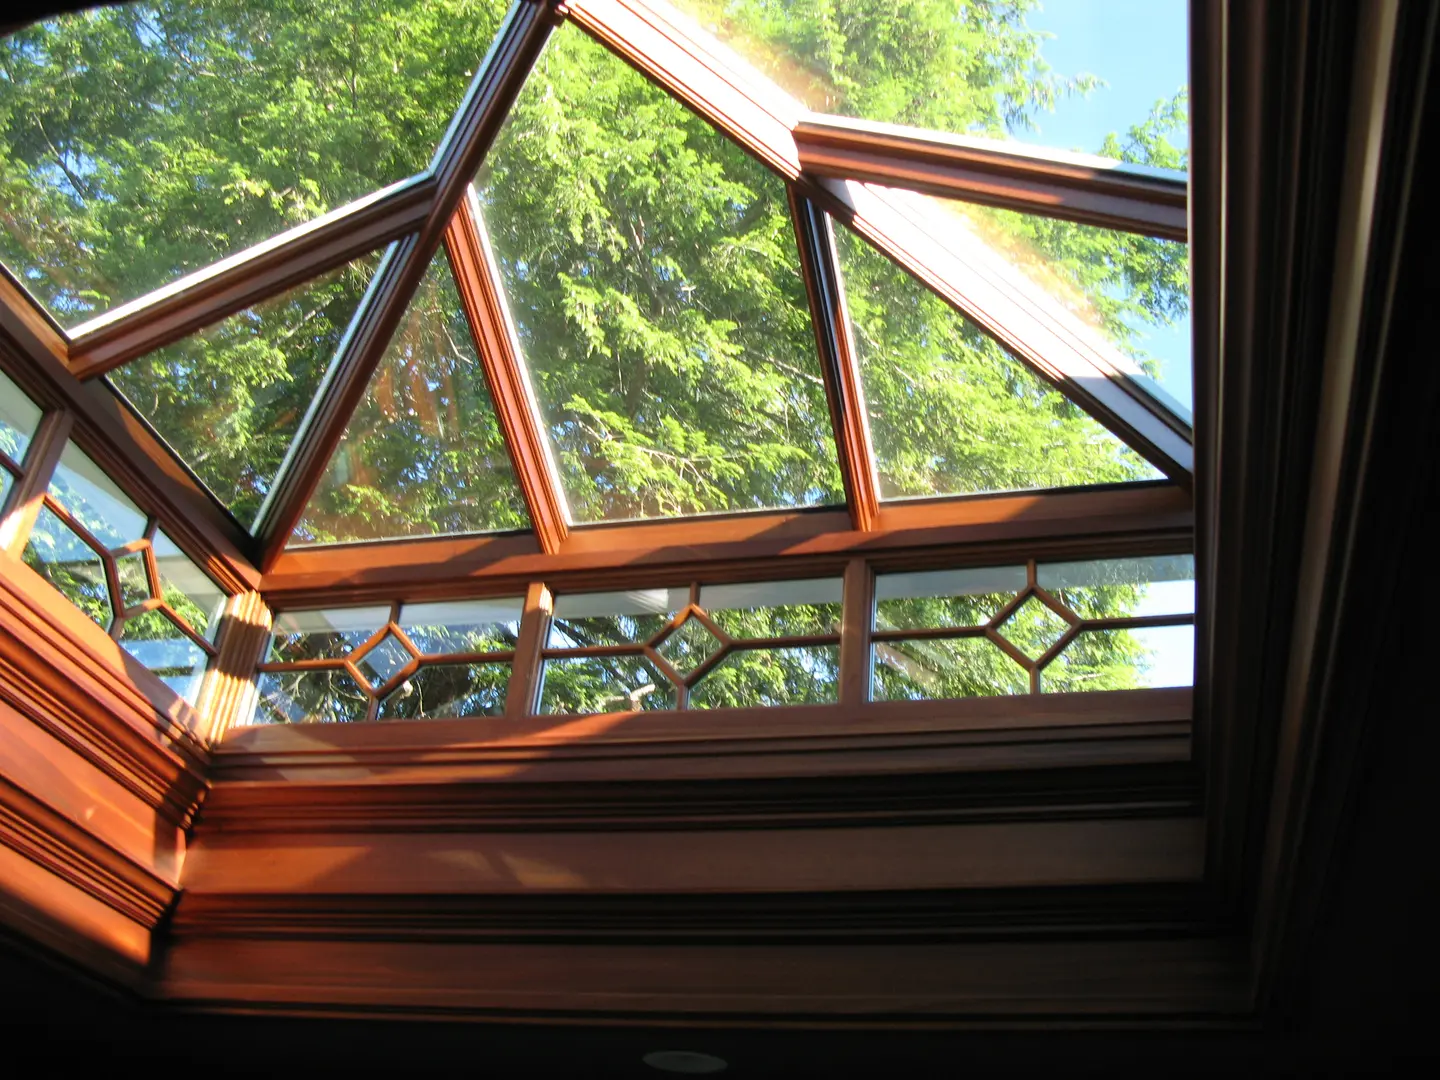 A wooden window with a glass roof and a tree in the background.